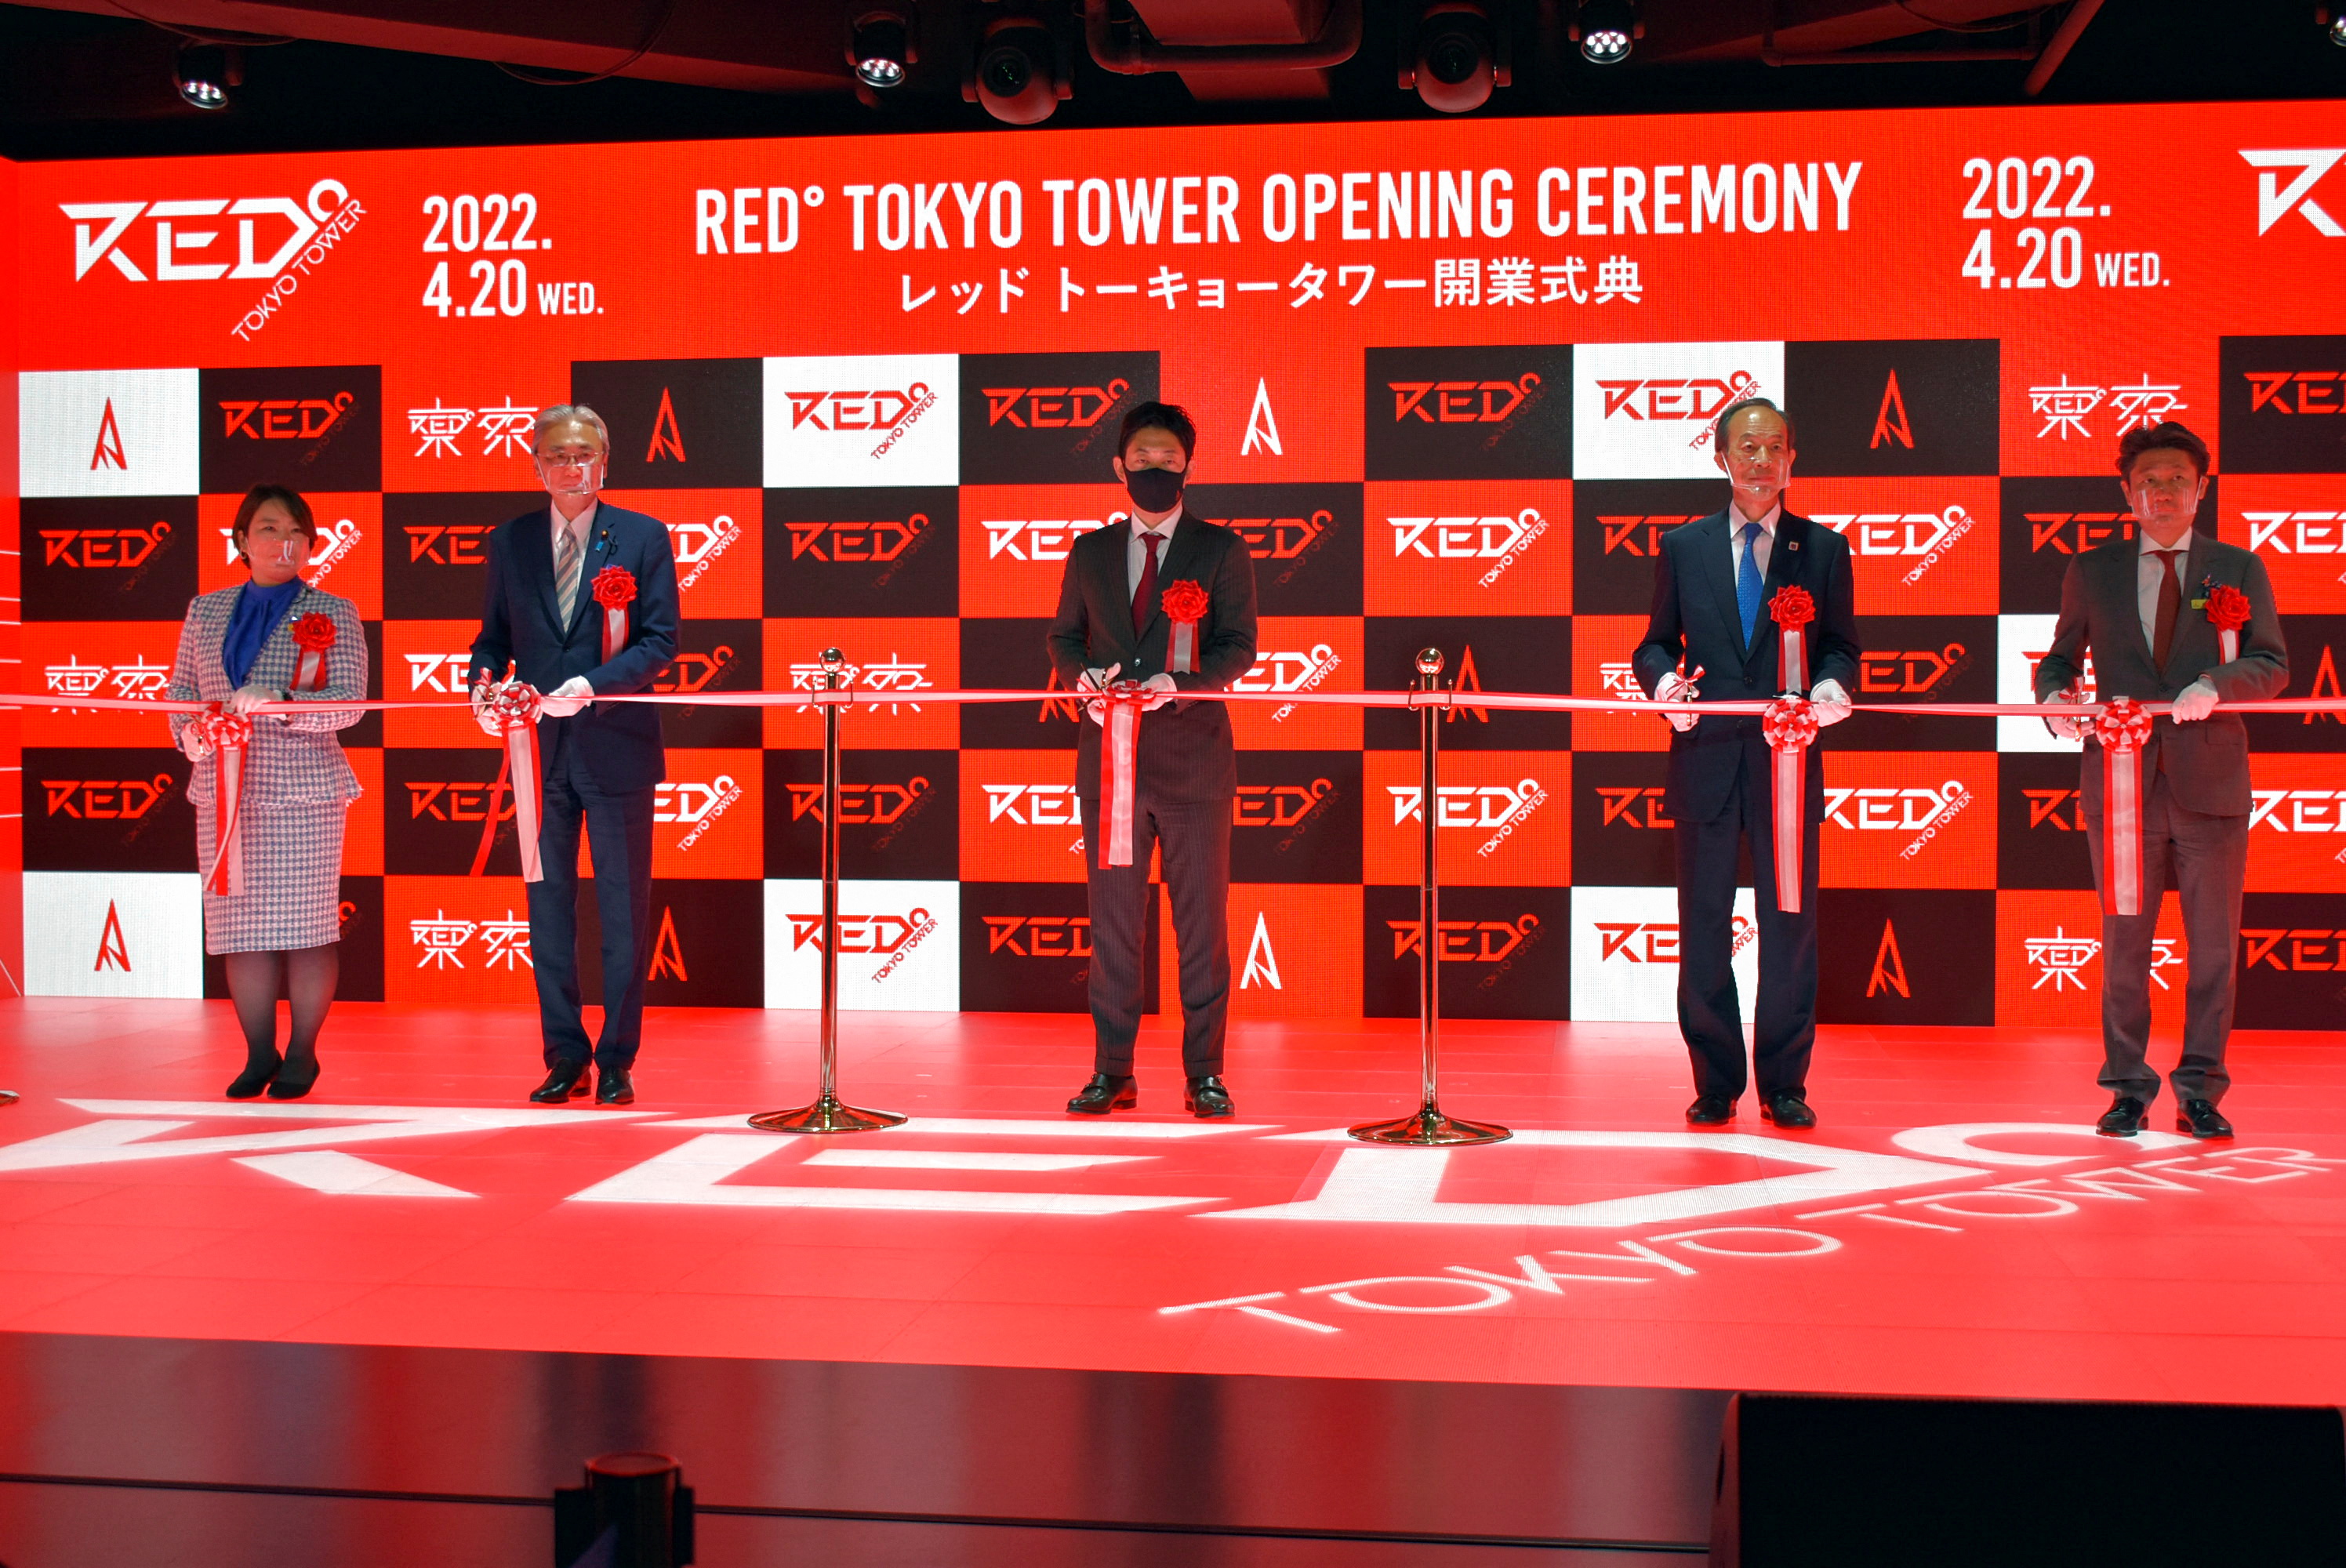 Red Tokyo Tower esports park opening ceremony, in Tokyo